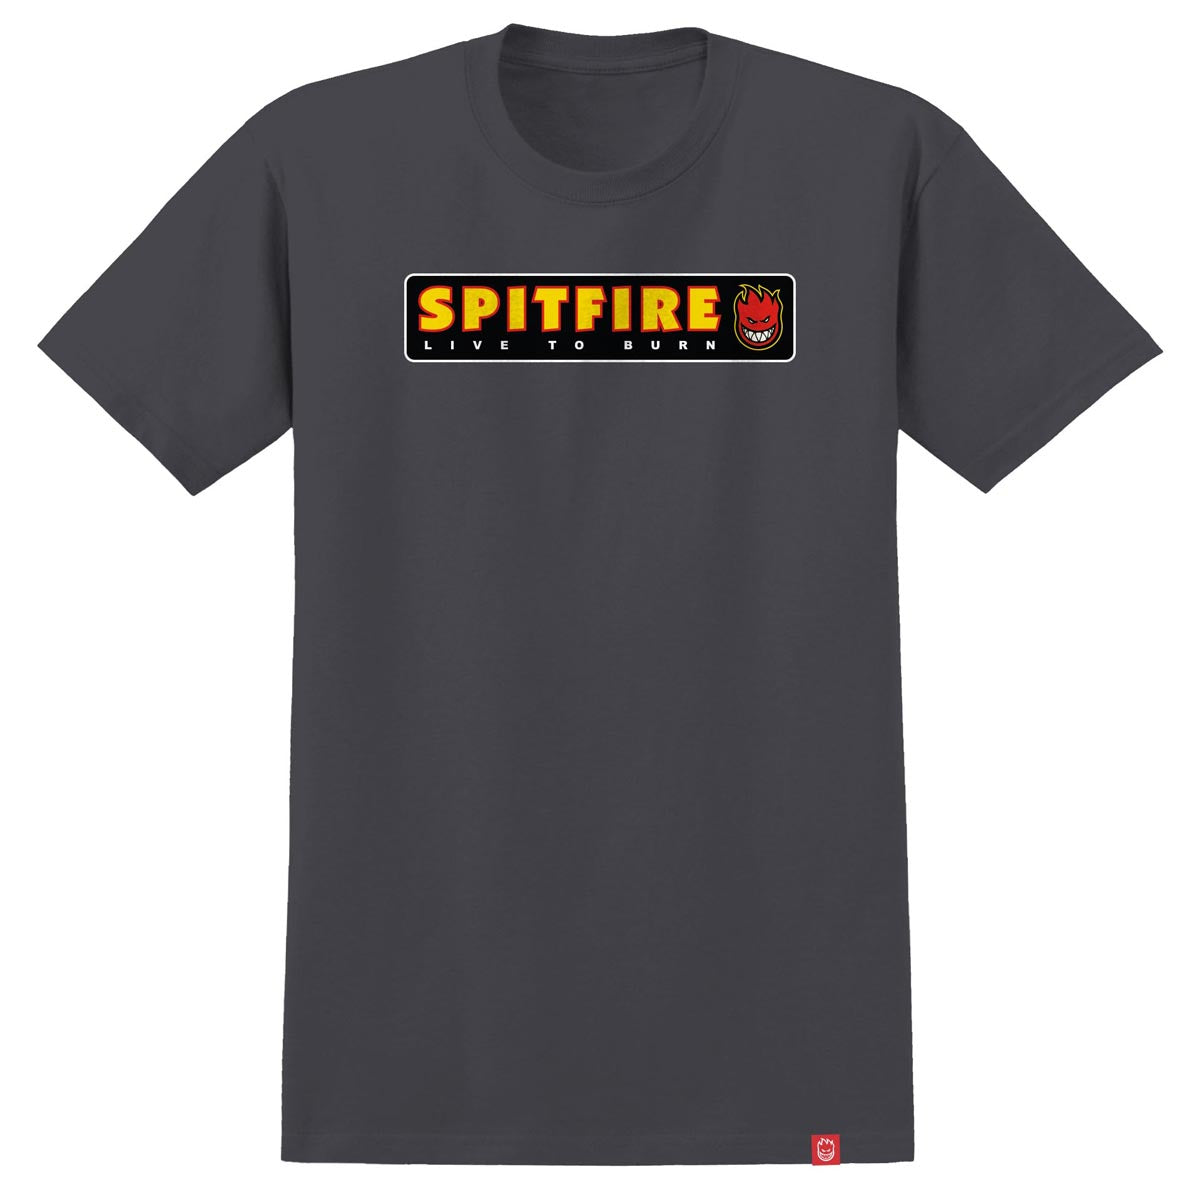 Spitfire Ltb T-Shirt - Charcoal/Multi Color image 1